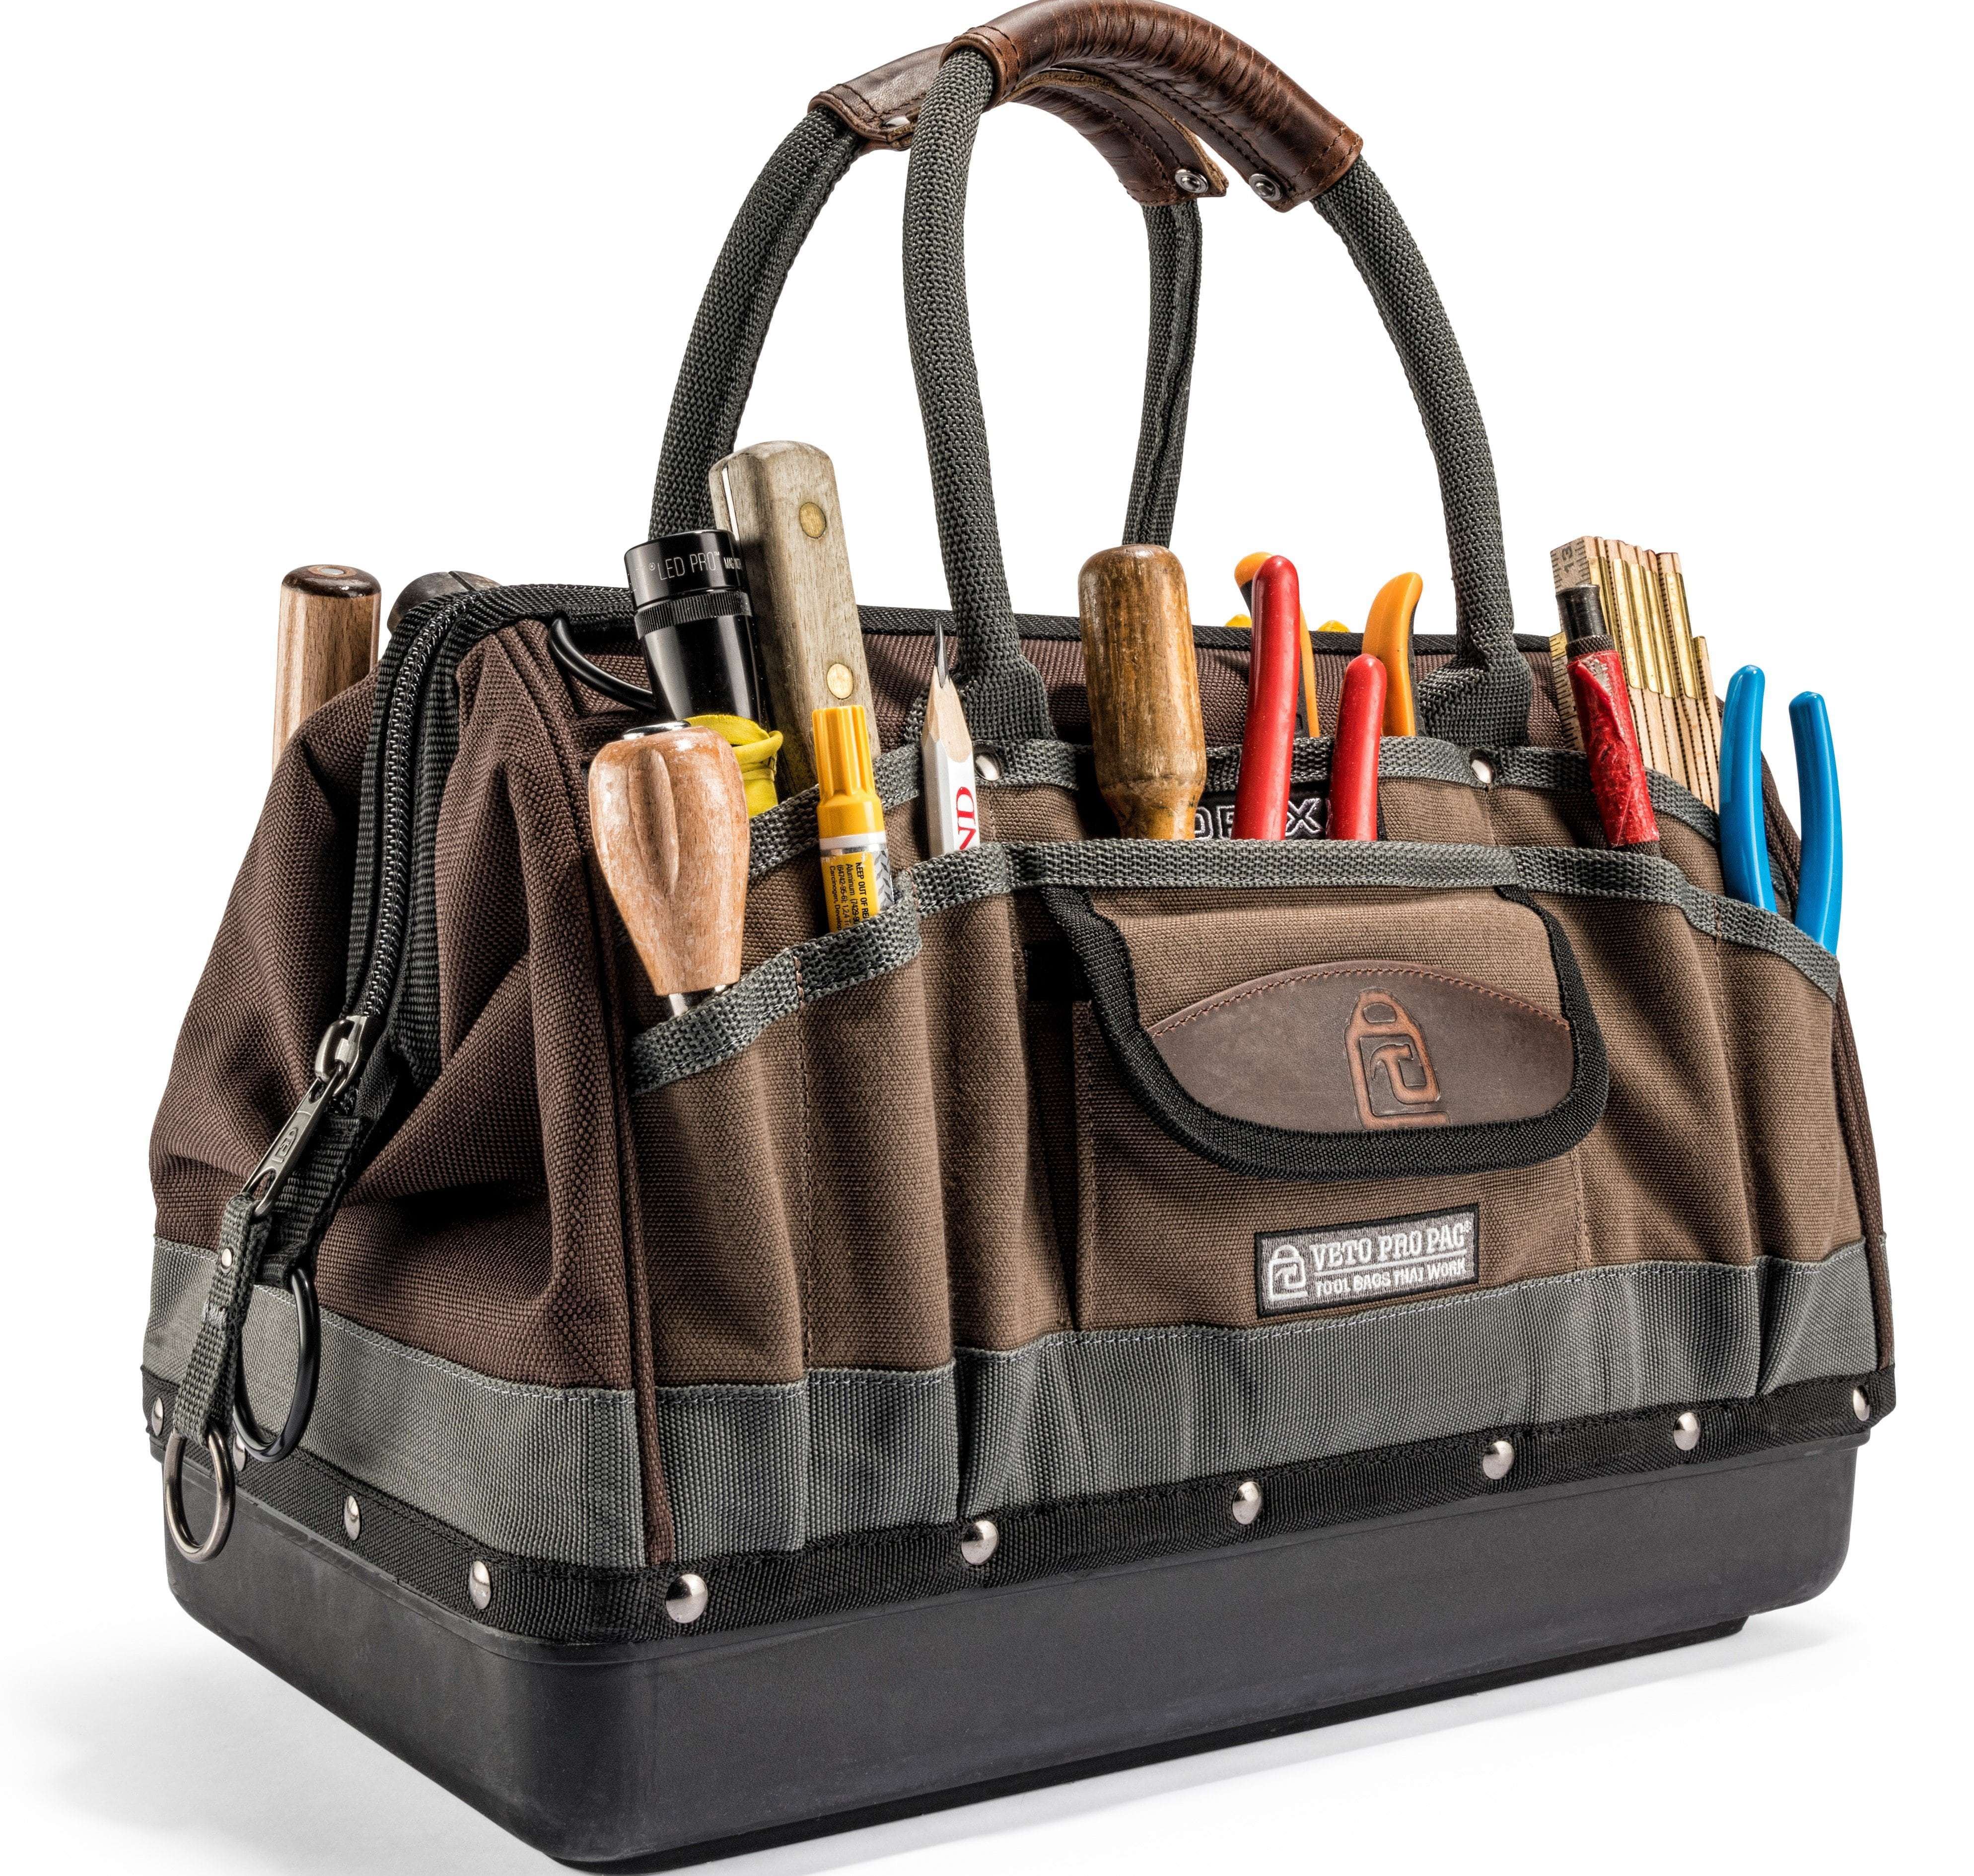 Veto Pro Pac Tool Tote Bag Open Top Large MB-OT-LC from Veto Pro